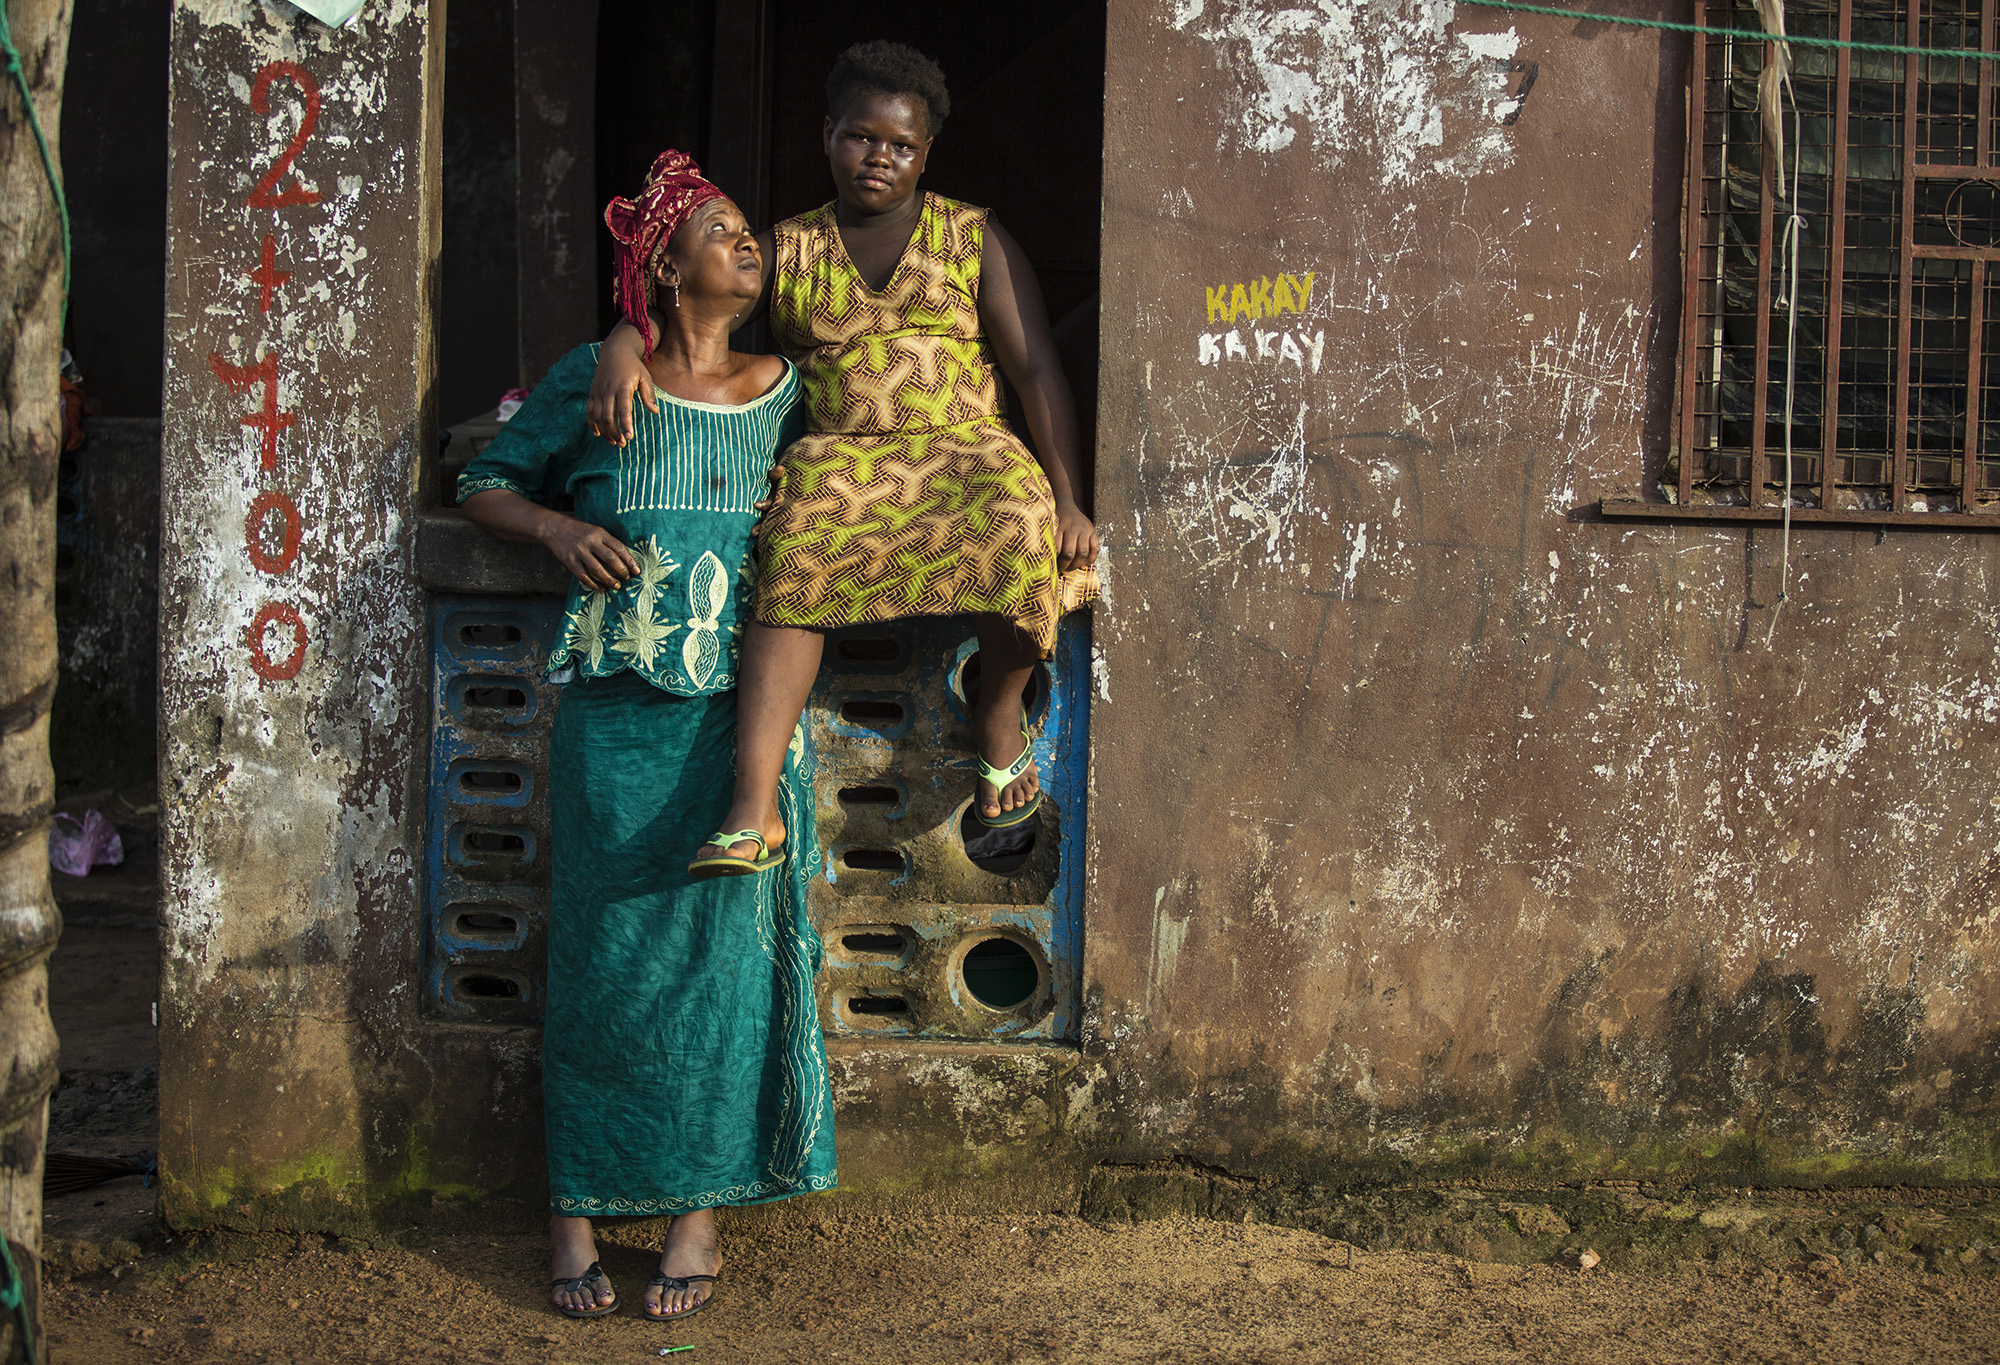  Isata Mansaray, Ebola survivor and orphan, with her grandmother Fatmata Mansaray, Sierra Leone“When I was released from the treatment centre I was told that my parents had gone to America, but later my uncle admitted to me that they had died. When t